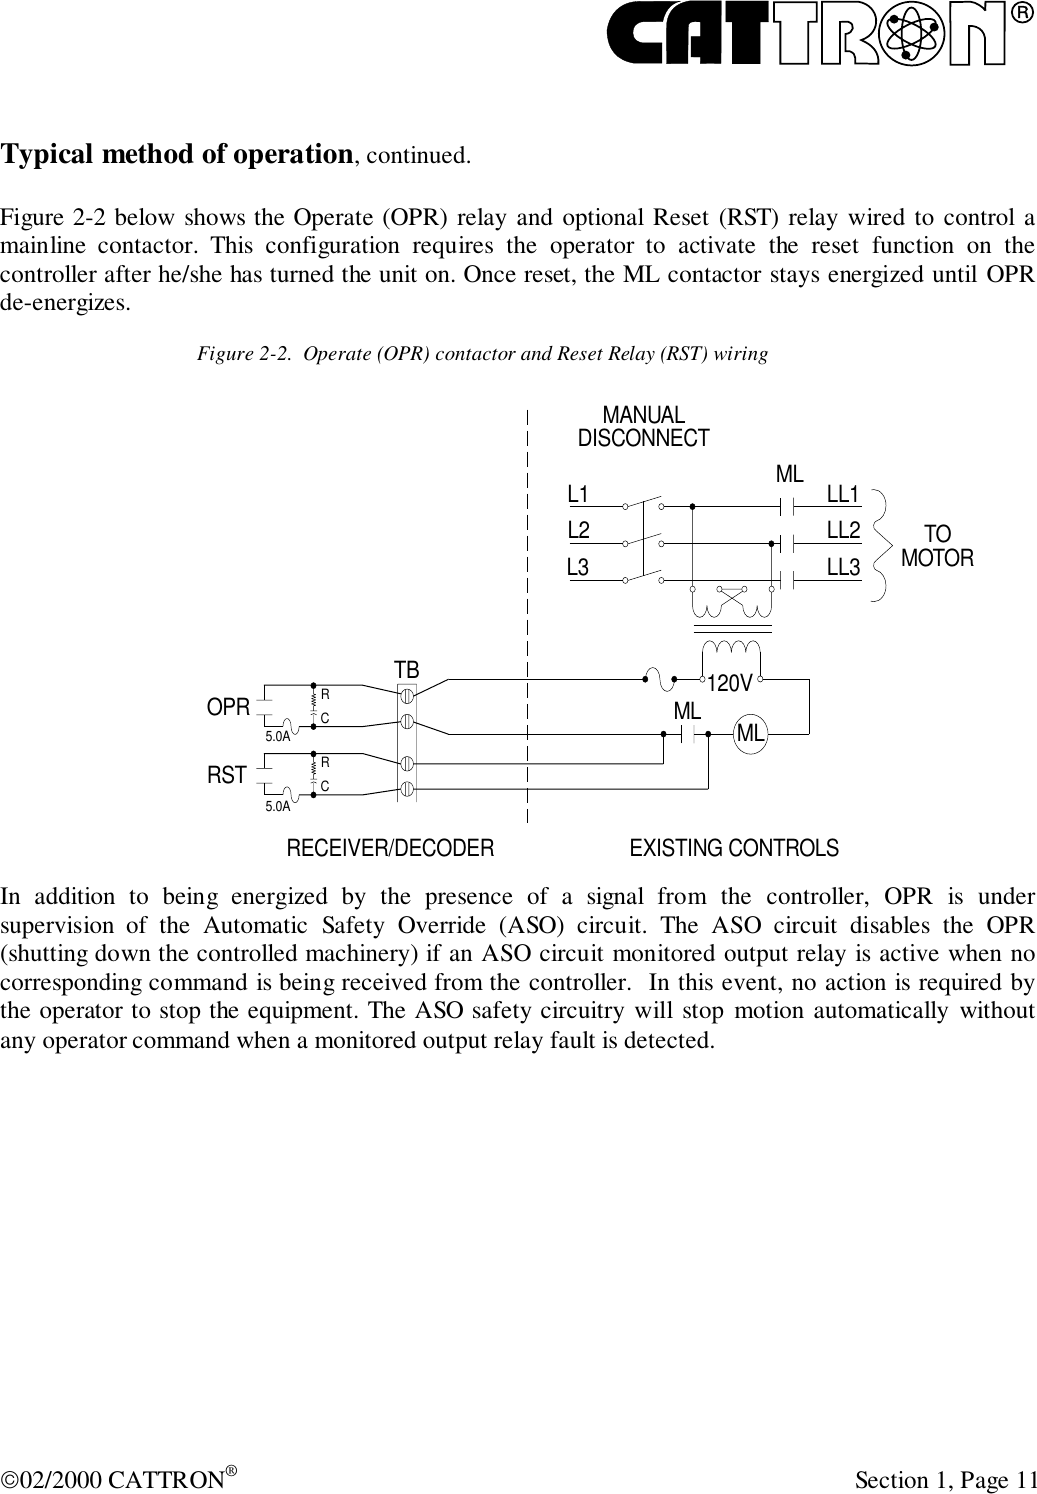 R02/2000 CATTRON® Section 1, Page 11Typical method of operation, continued.Figure 2-2 below shows the Operate (OPR) relay and optional Reset (RST) relay wired to control amainline contactor. This configuration requires the operator to activate the reset function on thecontroller after he/she has turned the unit on. Once reset, the ML contactor stays energized until OPRde-energizes.Figure 2-2.  Operate (OPR) contactor and Reset Relay (RST) wiringOPR 120VRSTRRCC5.0A5.0ATBL1 MLML MLMANUALDISCONNECTL2L3LL1LL2LL3TOMOTORRECEIVER/DECODER EXISTING CONTROLSIn addition to being energized by the presence of a signal from the controller, OPR is undersupervision of the Automatic Safety Override (ASO) circuit. The ASO circuit disables the OPR(shutting down the controlled machinery) if an ASO circuit monitored output relay is active when nocorresponding command is being received from the controller.  In this event, no action is required bythe operator to stop the equipment. The ASO safety circuitry will stop motion automatically withoutany operator command when a monitored output relay fault is detected.